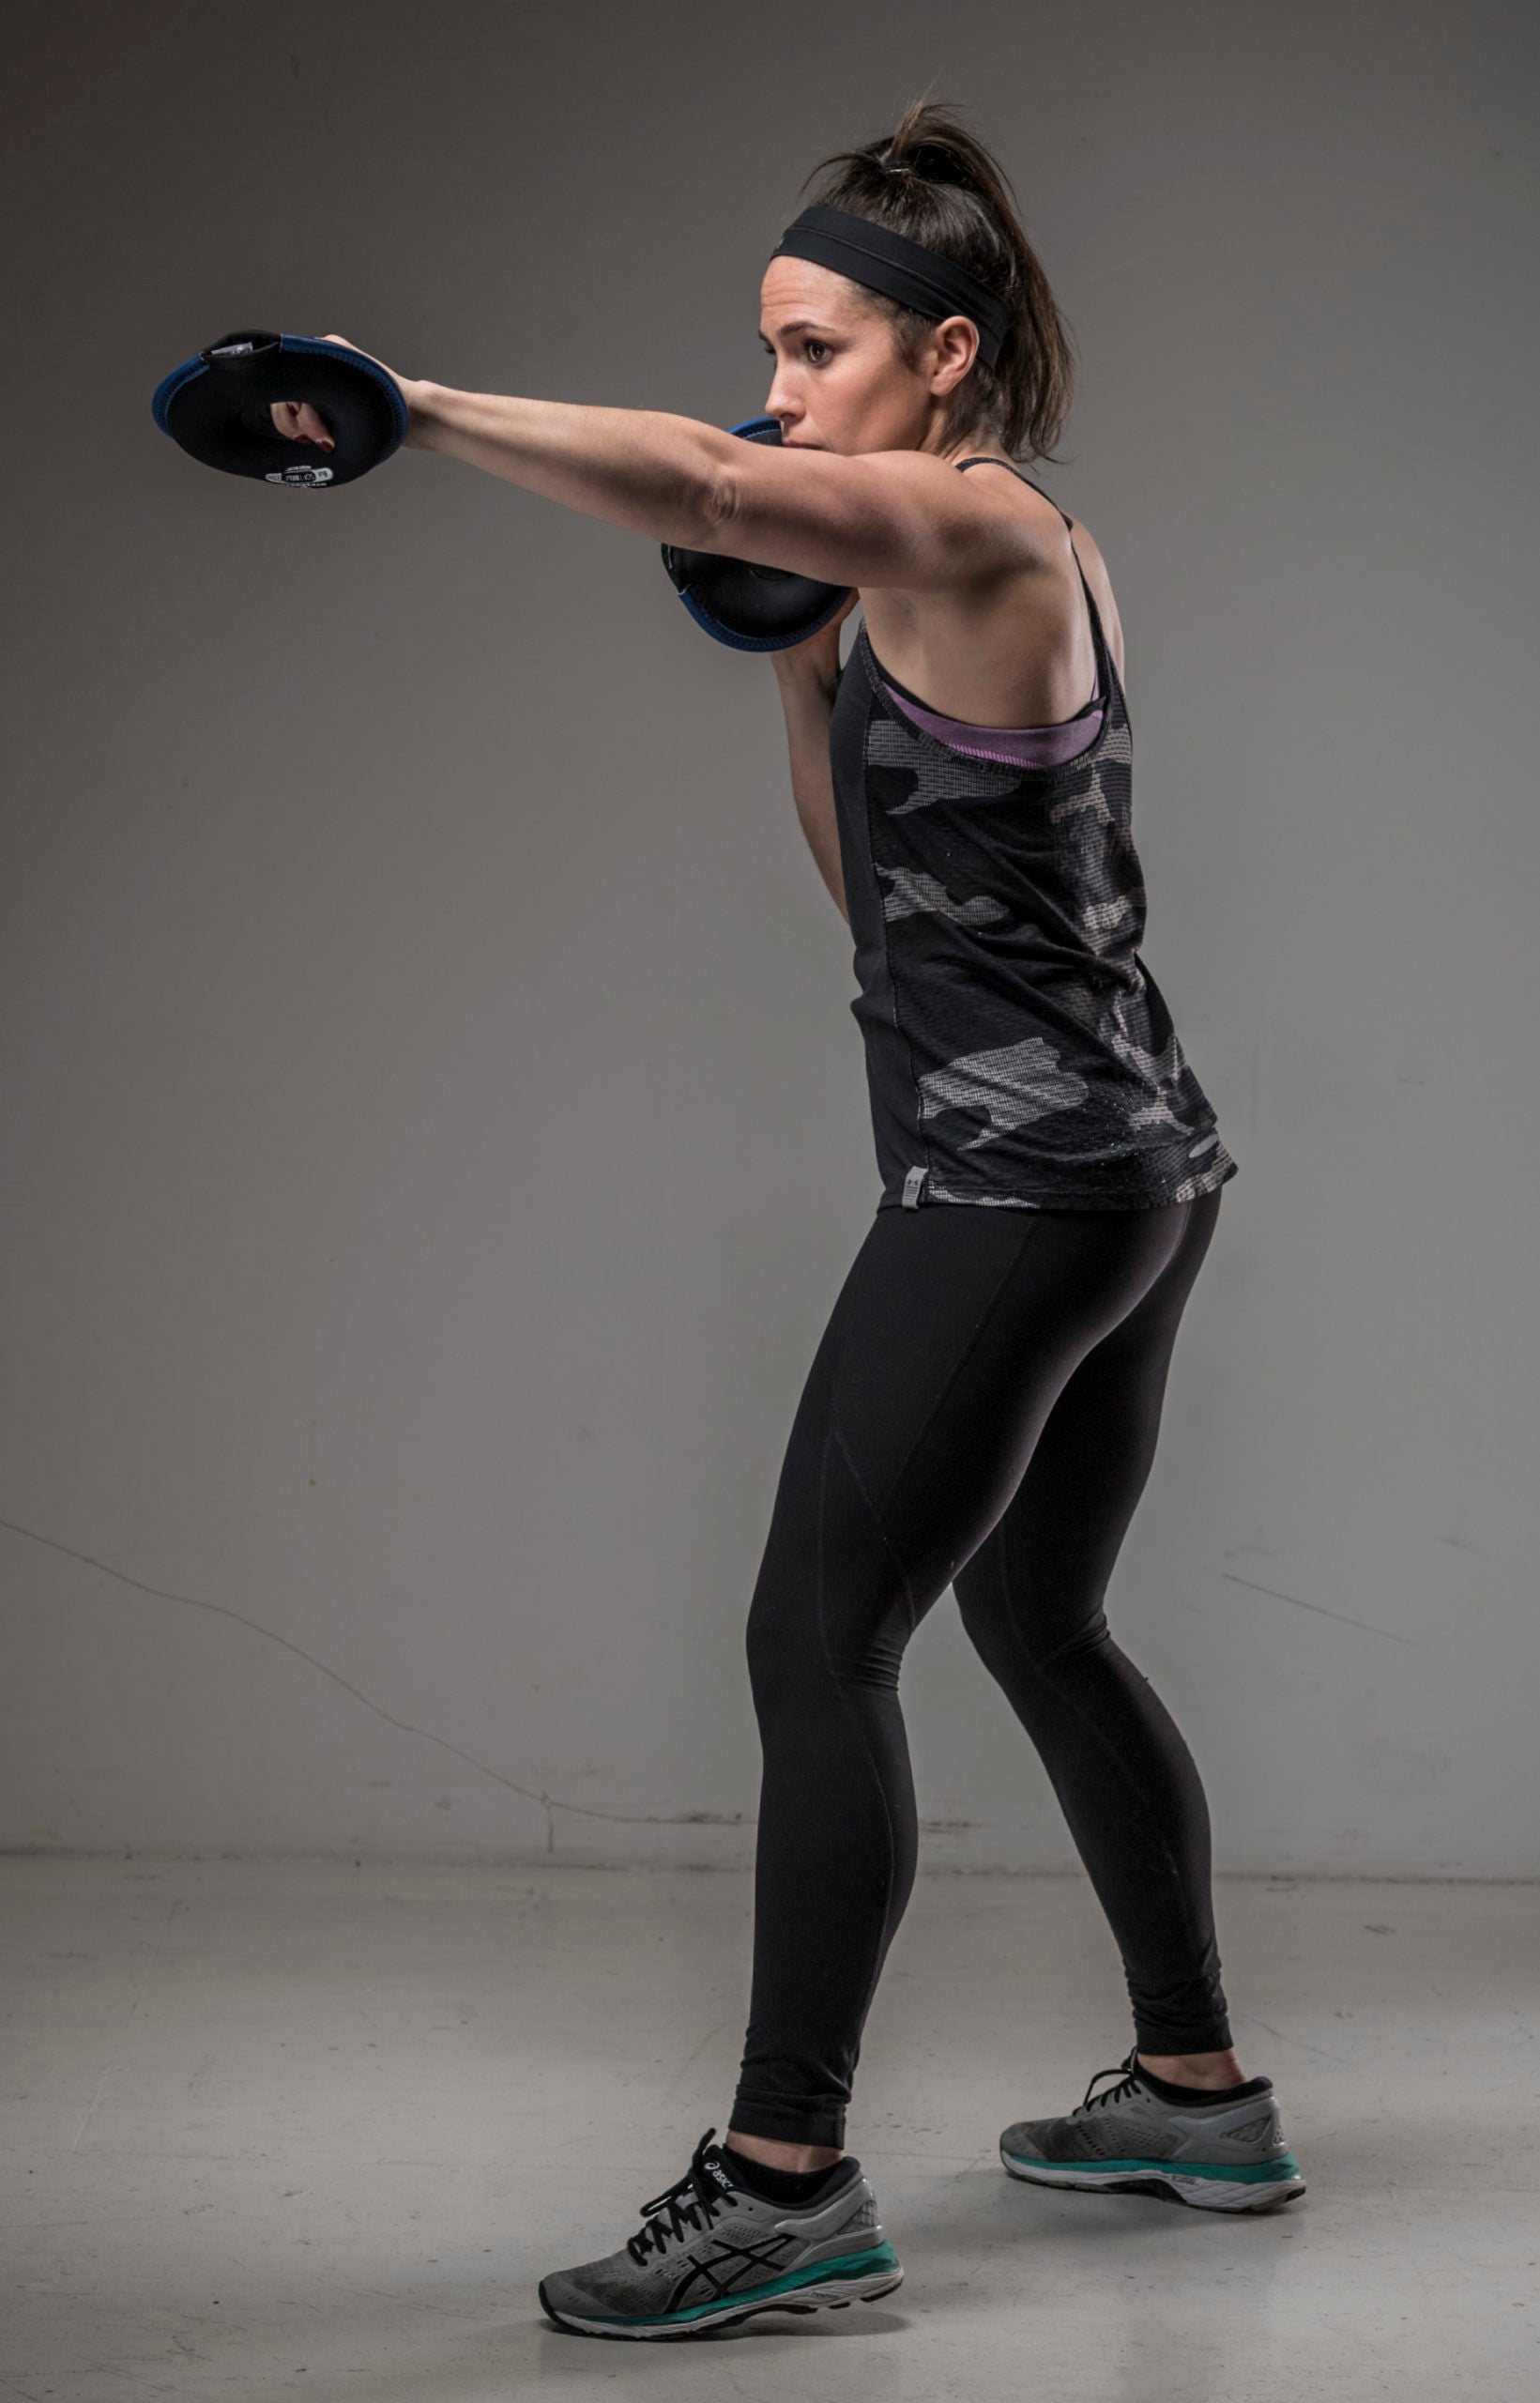 A female fitness model is pictured holding a softbell hand weight plate in each hand doing weighted punches